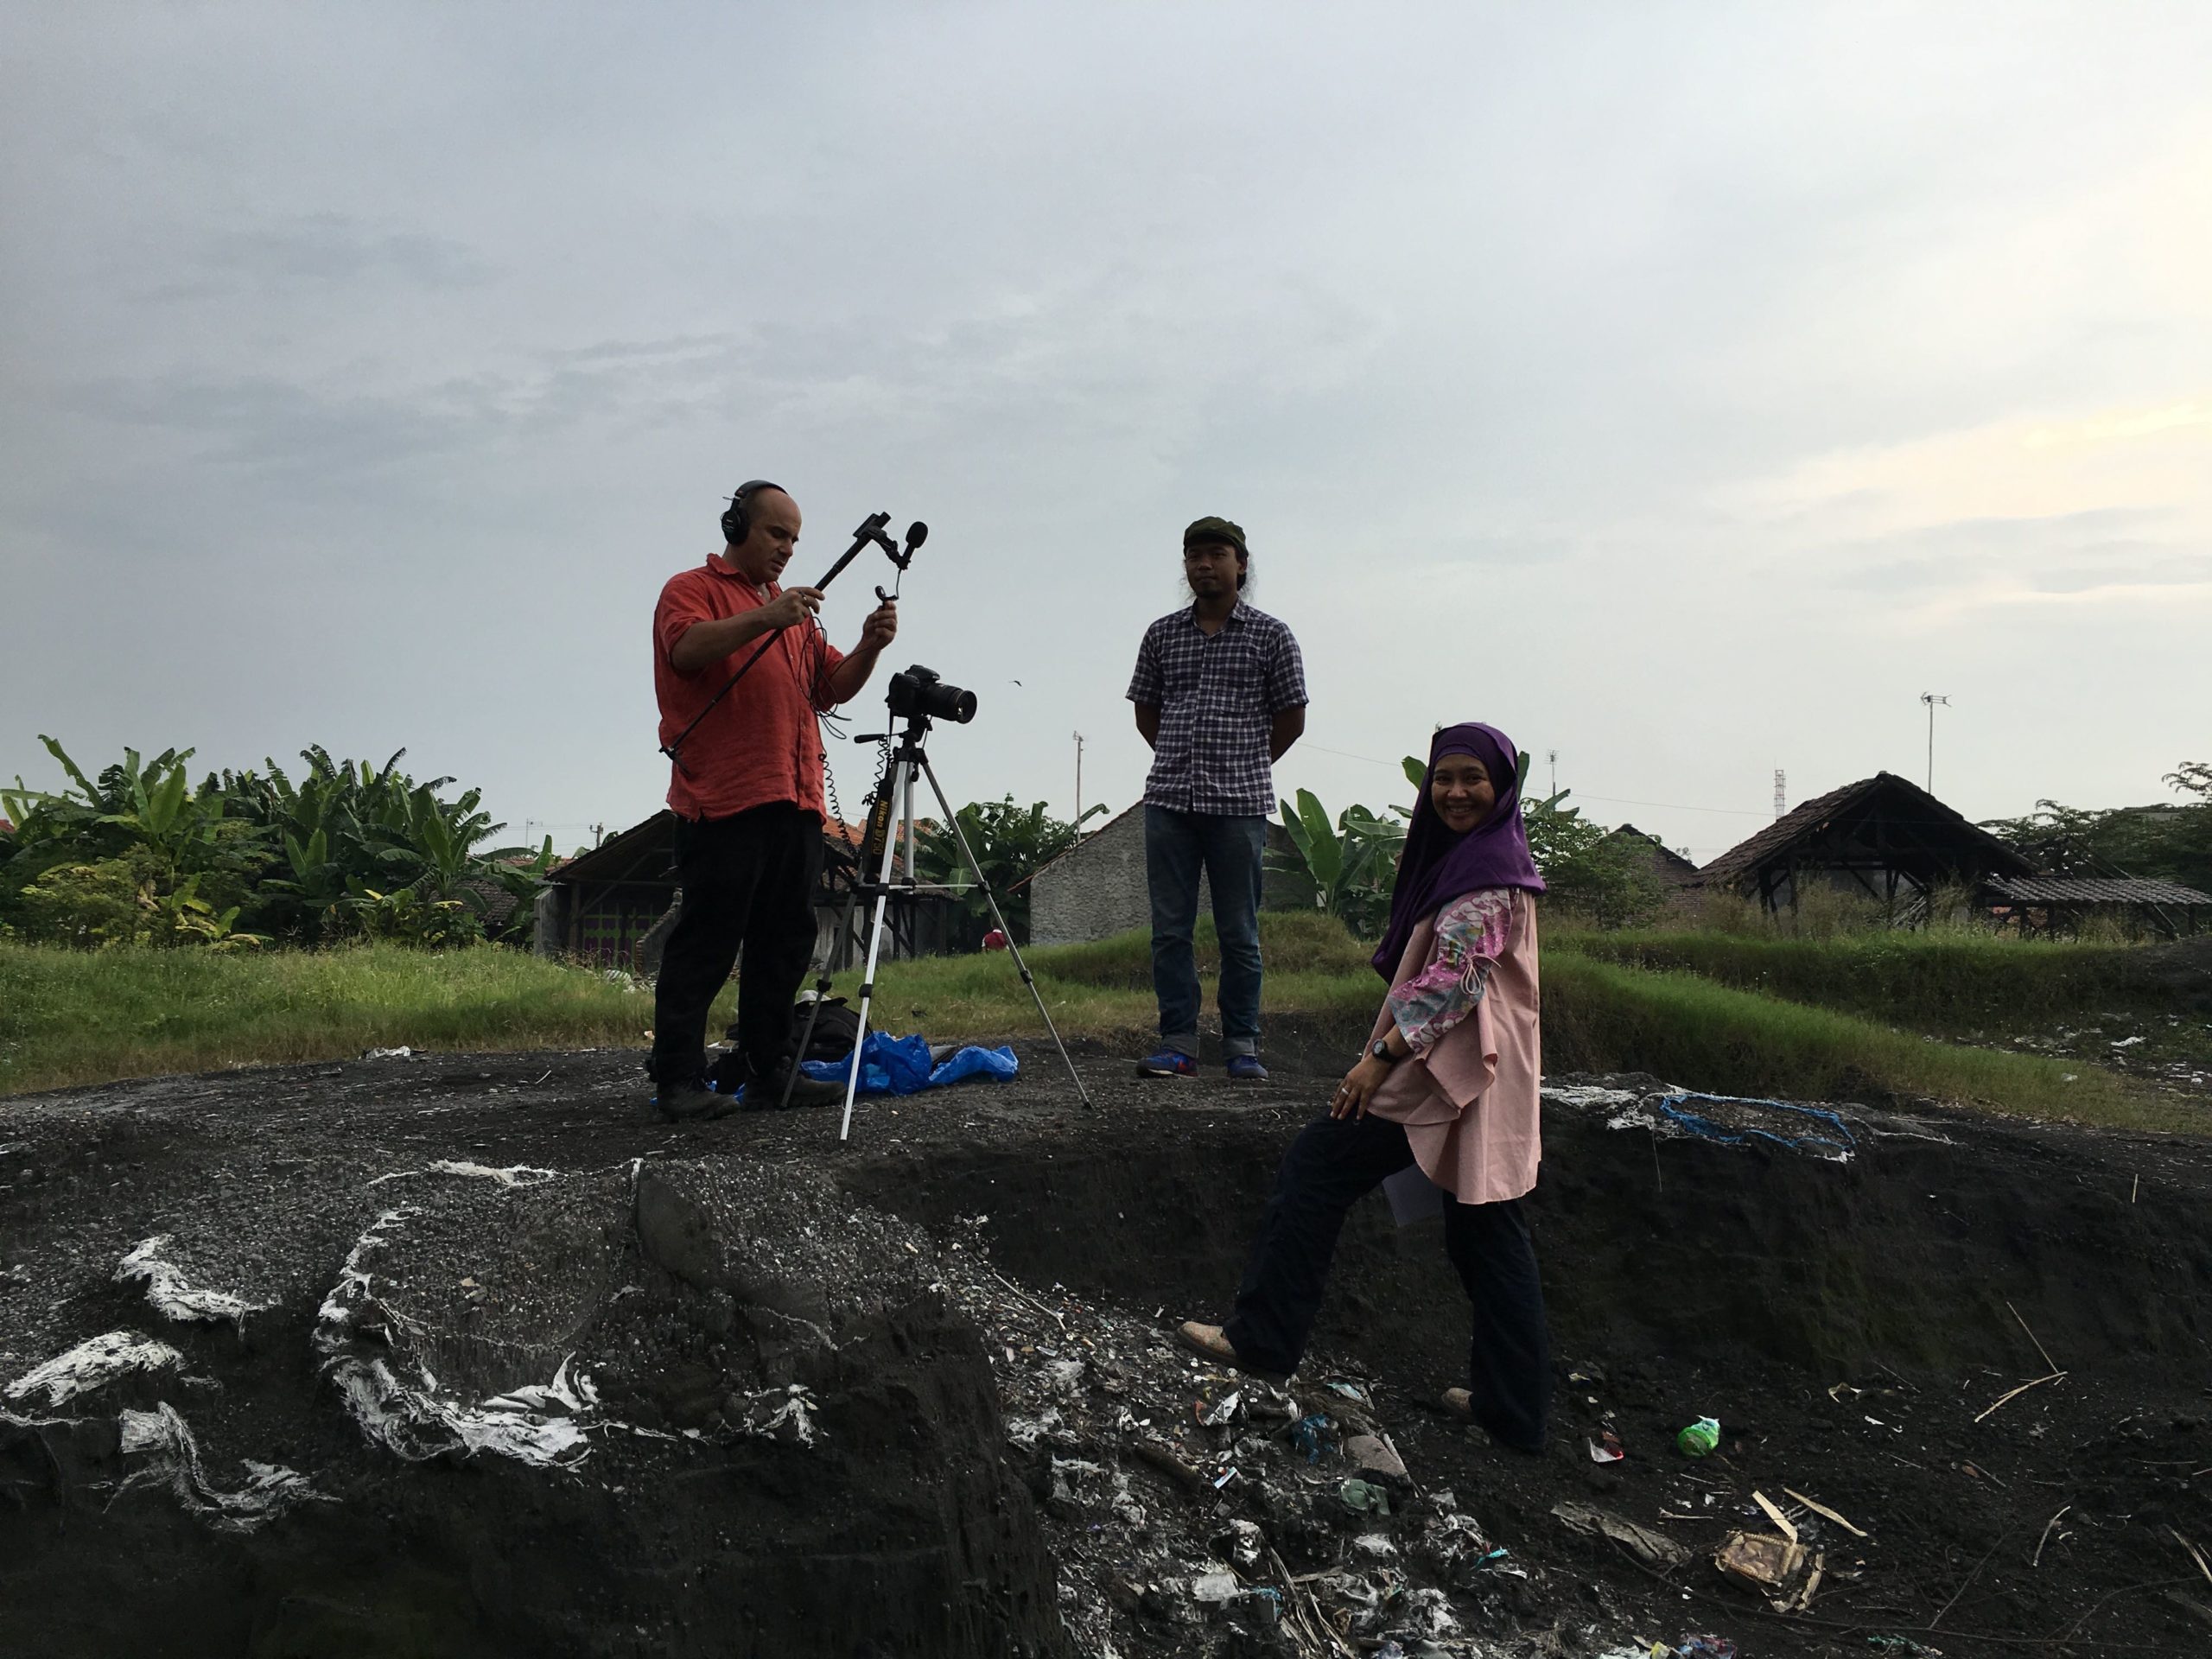 Budi, Pure Earth's country director in Indonesia, preparing for an interview in the middle of the dumpsite.